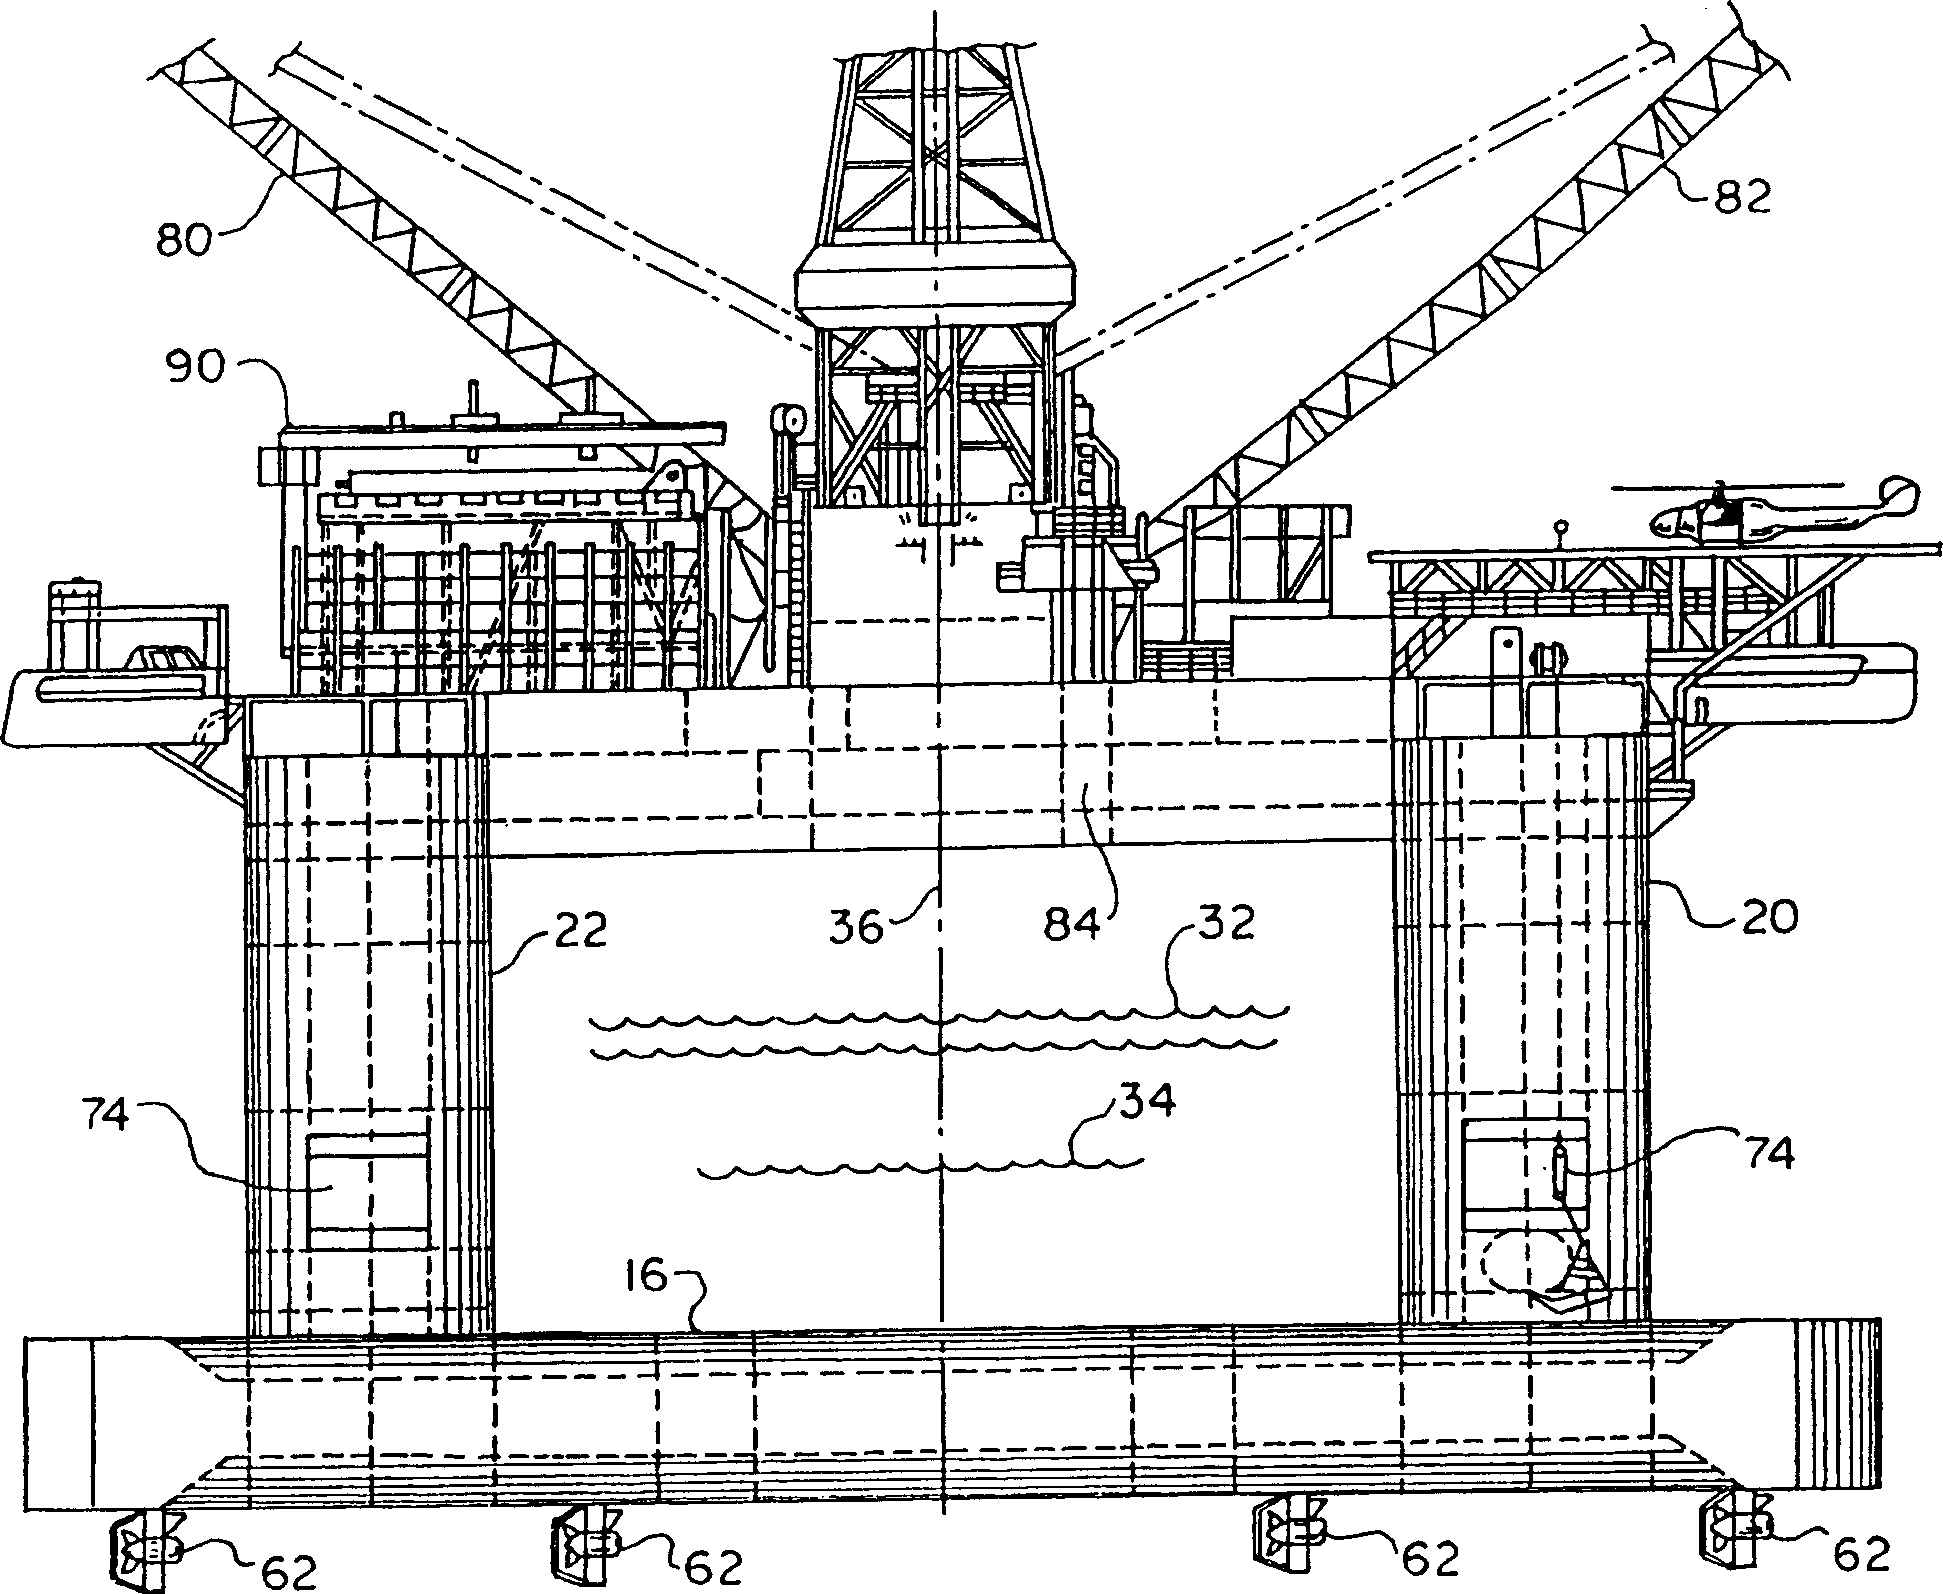 Dynamically positioned semi-submersible drilling vessel with slender horizontal braces